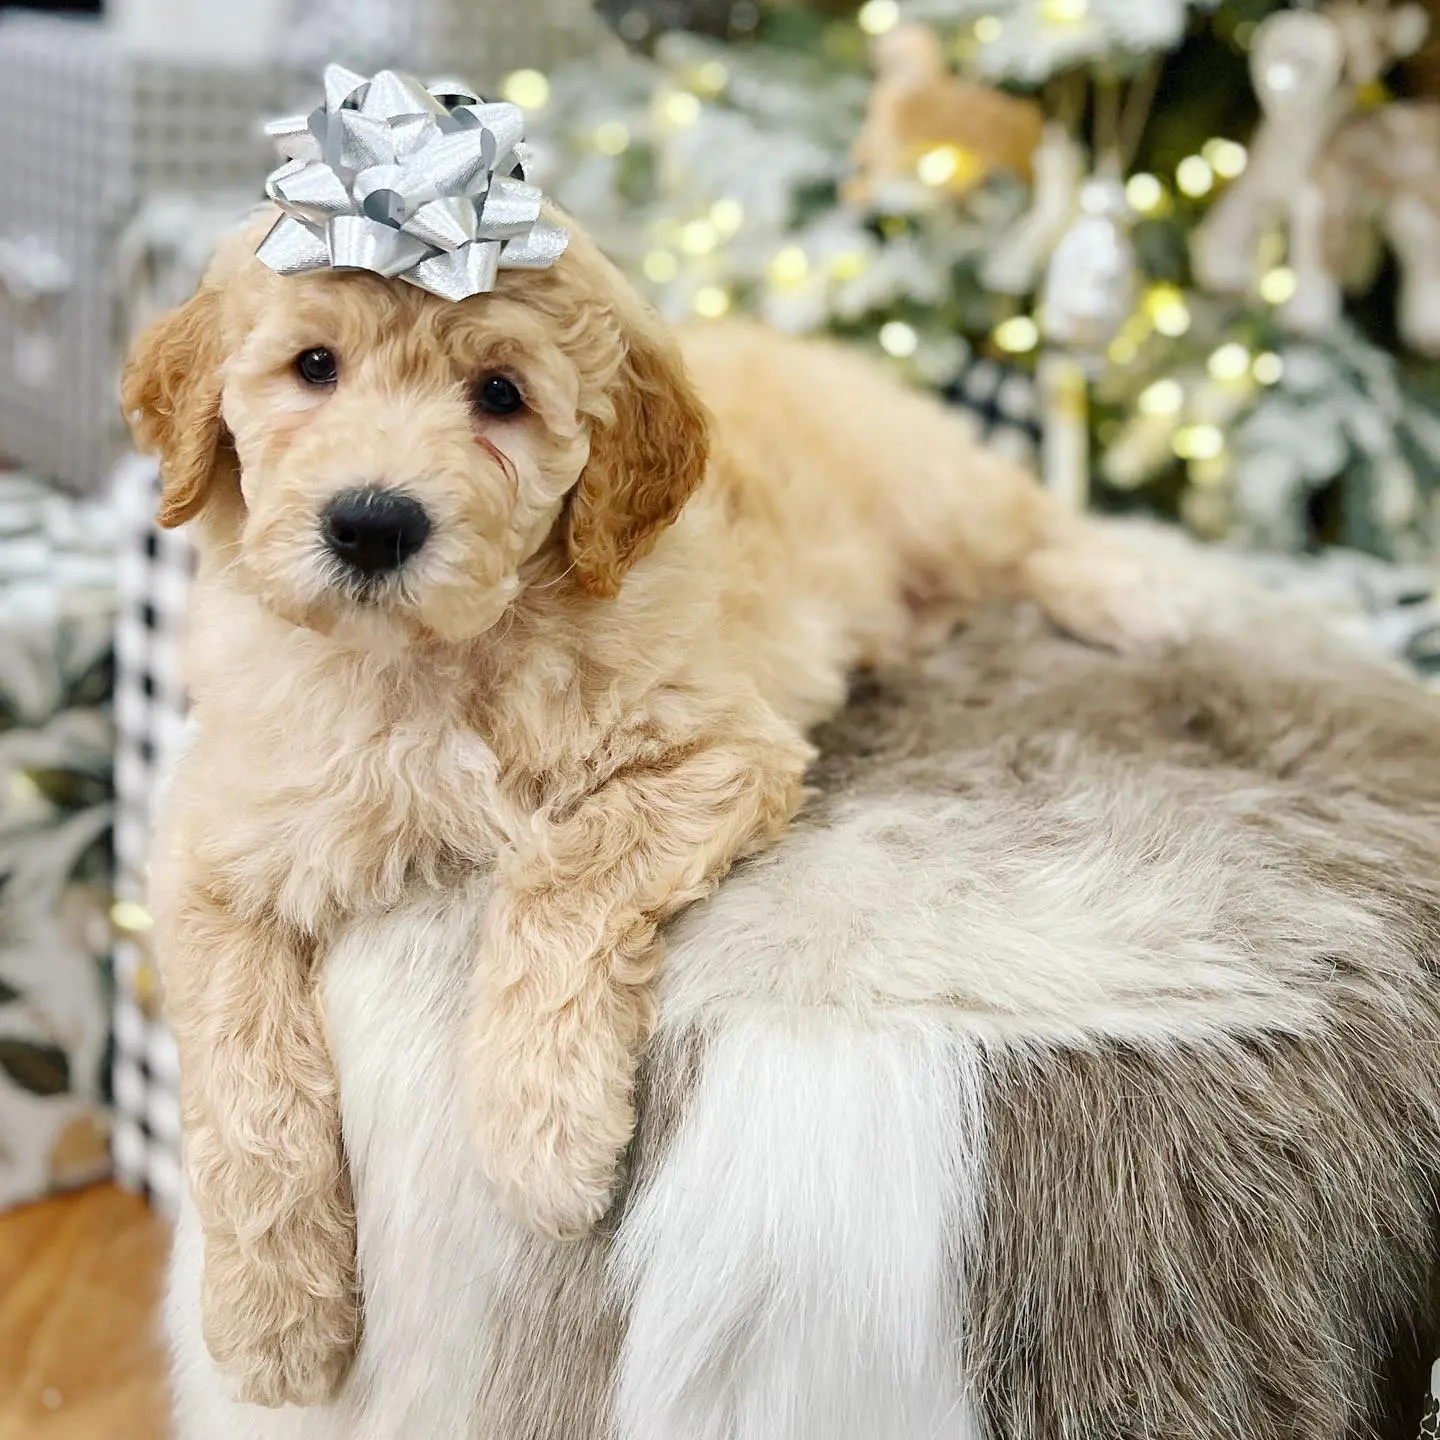 F1b champagne color miniature English teddy bear goldendoodle puppy with a bow on its head